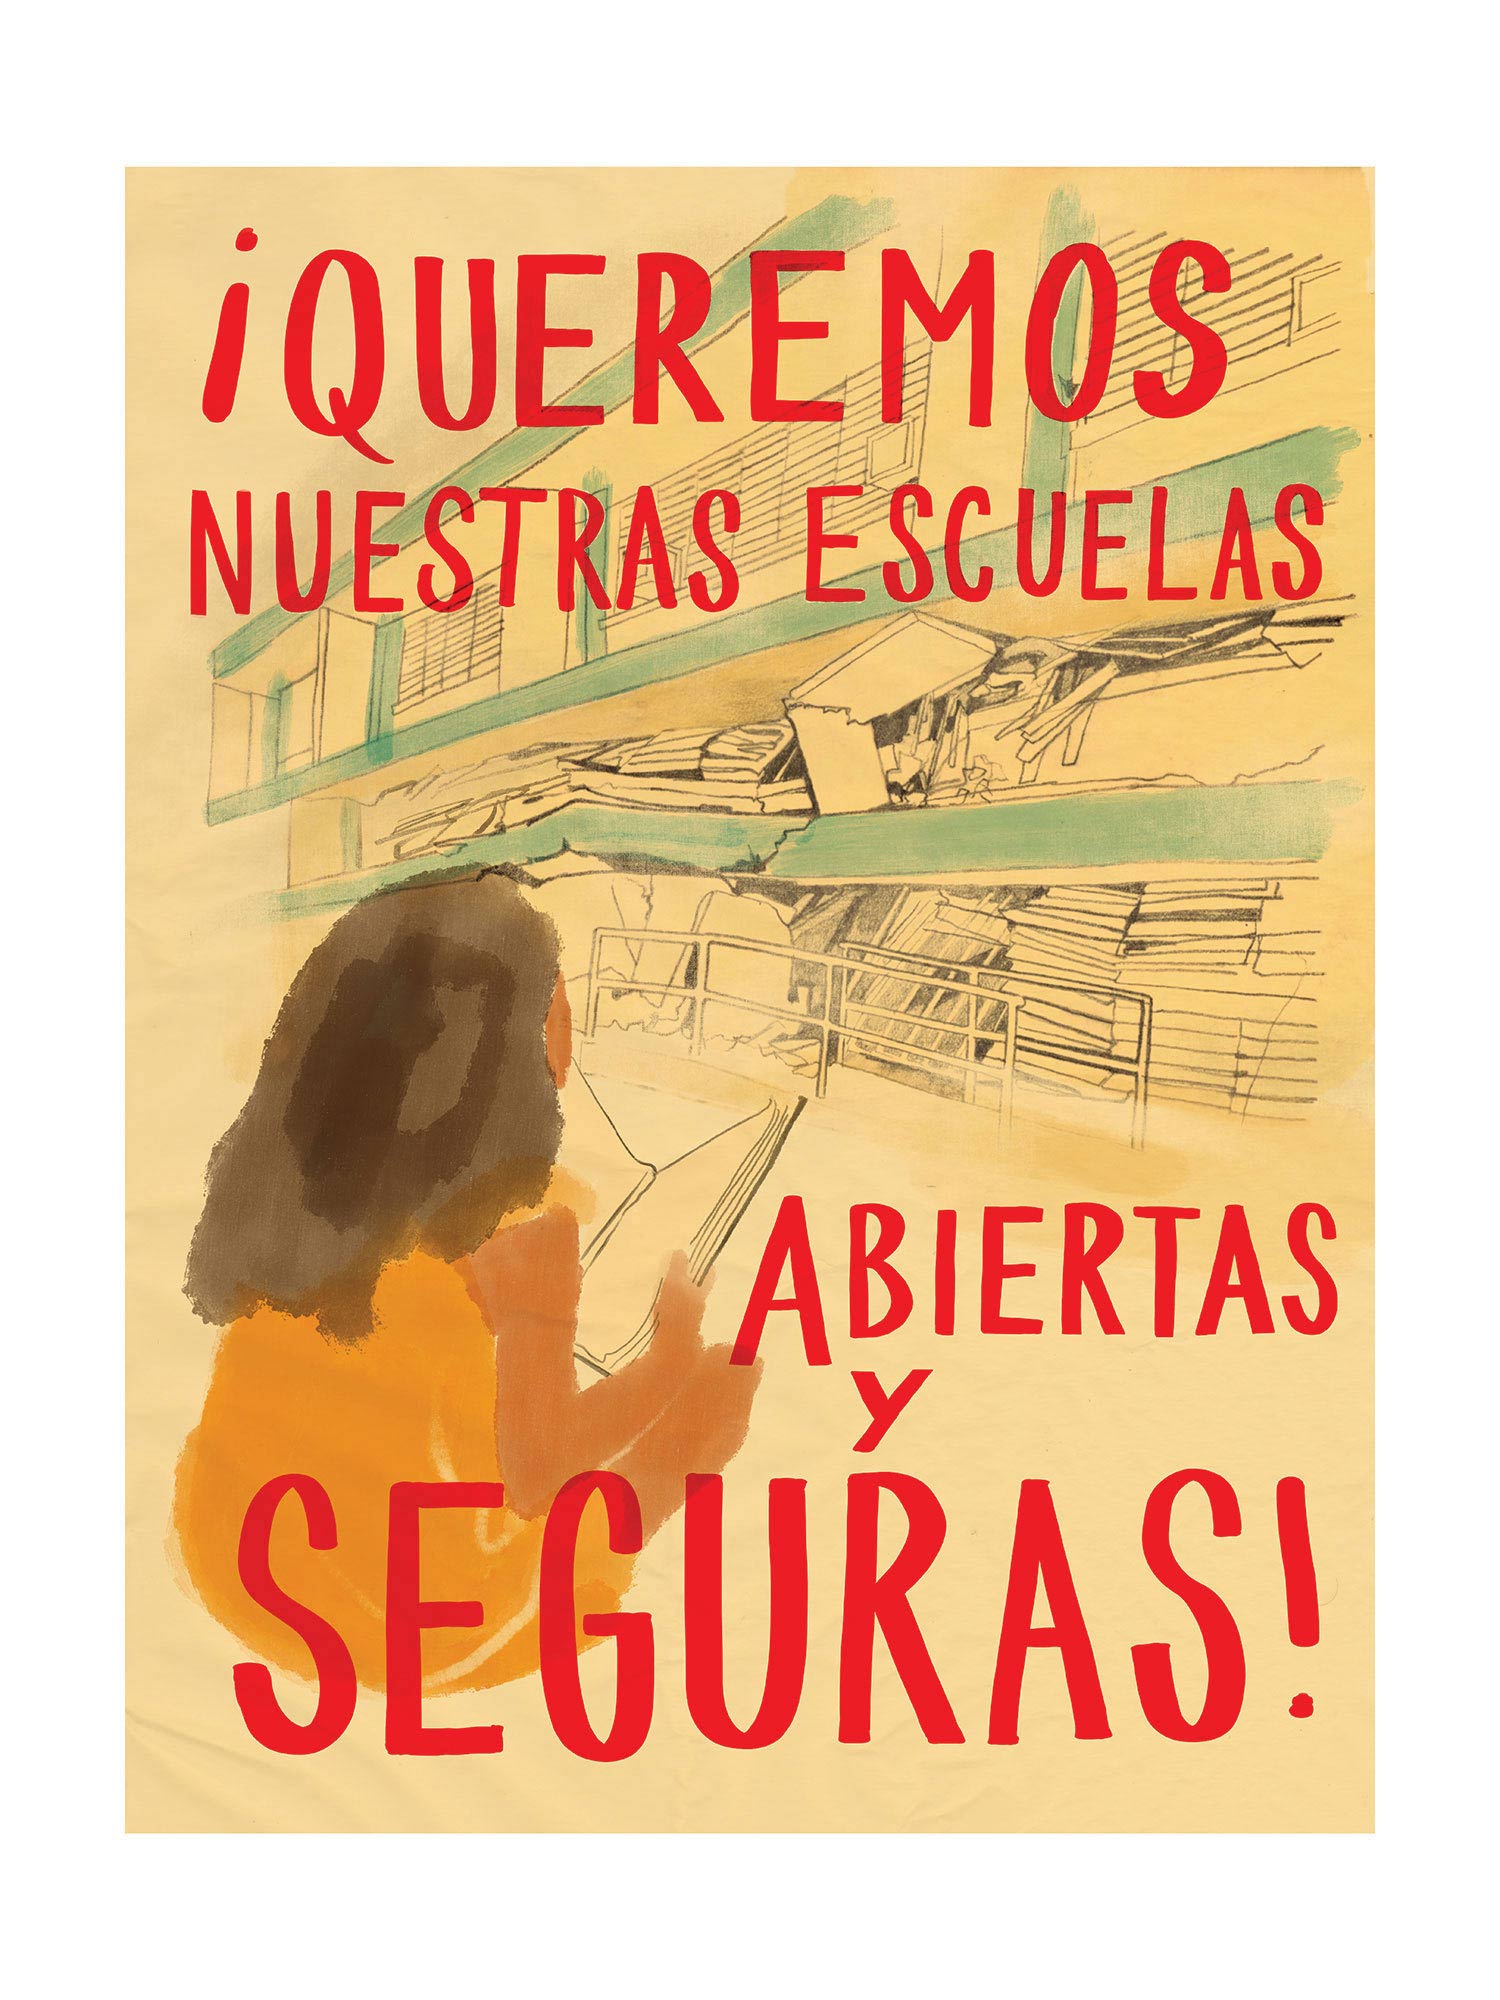 An activist sign highlighting poor educational conditions, with the caption “Queremos Nuestras Escuelas Abiertas y Seguras” (We want our schools to be open, secure, and safe)